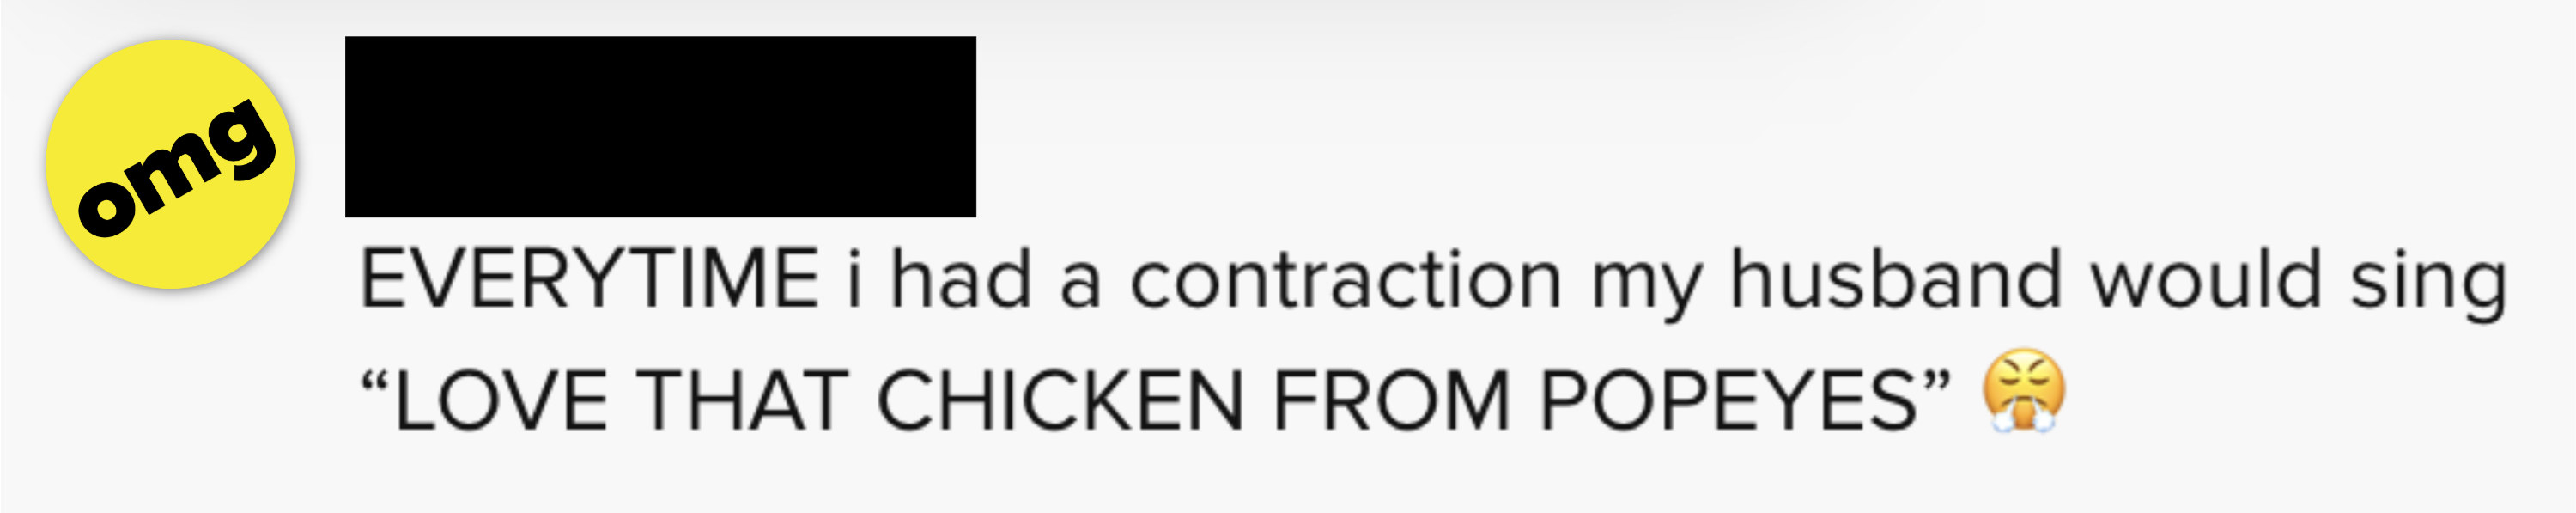 Every time I had a contraction my husband would sing &#x27;LOVE THAT CHICKEN FROM POPEYES&#x27;&quot;